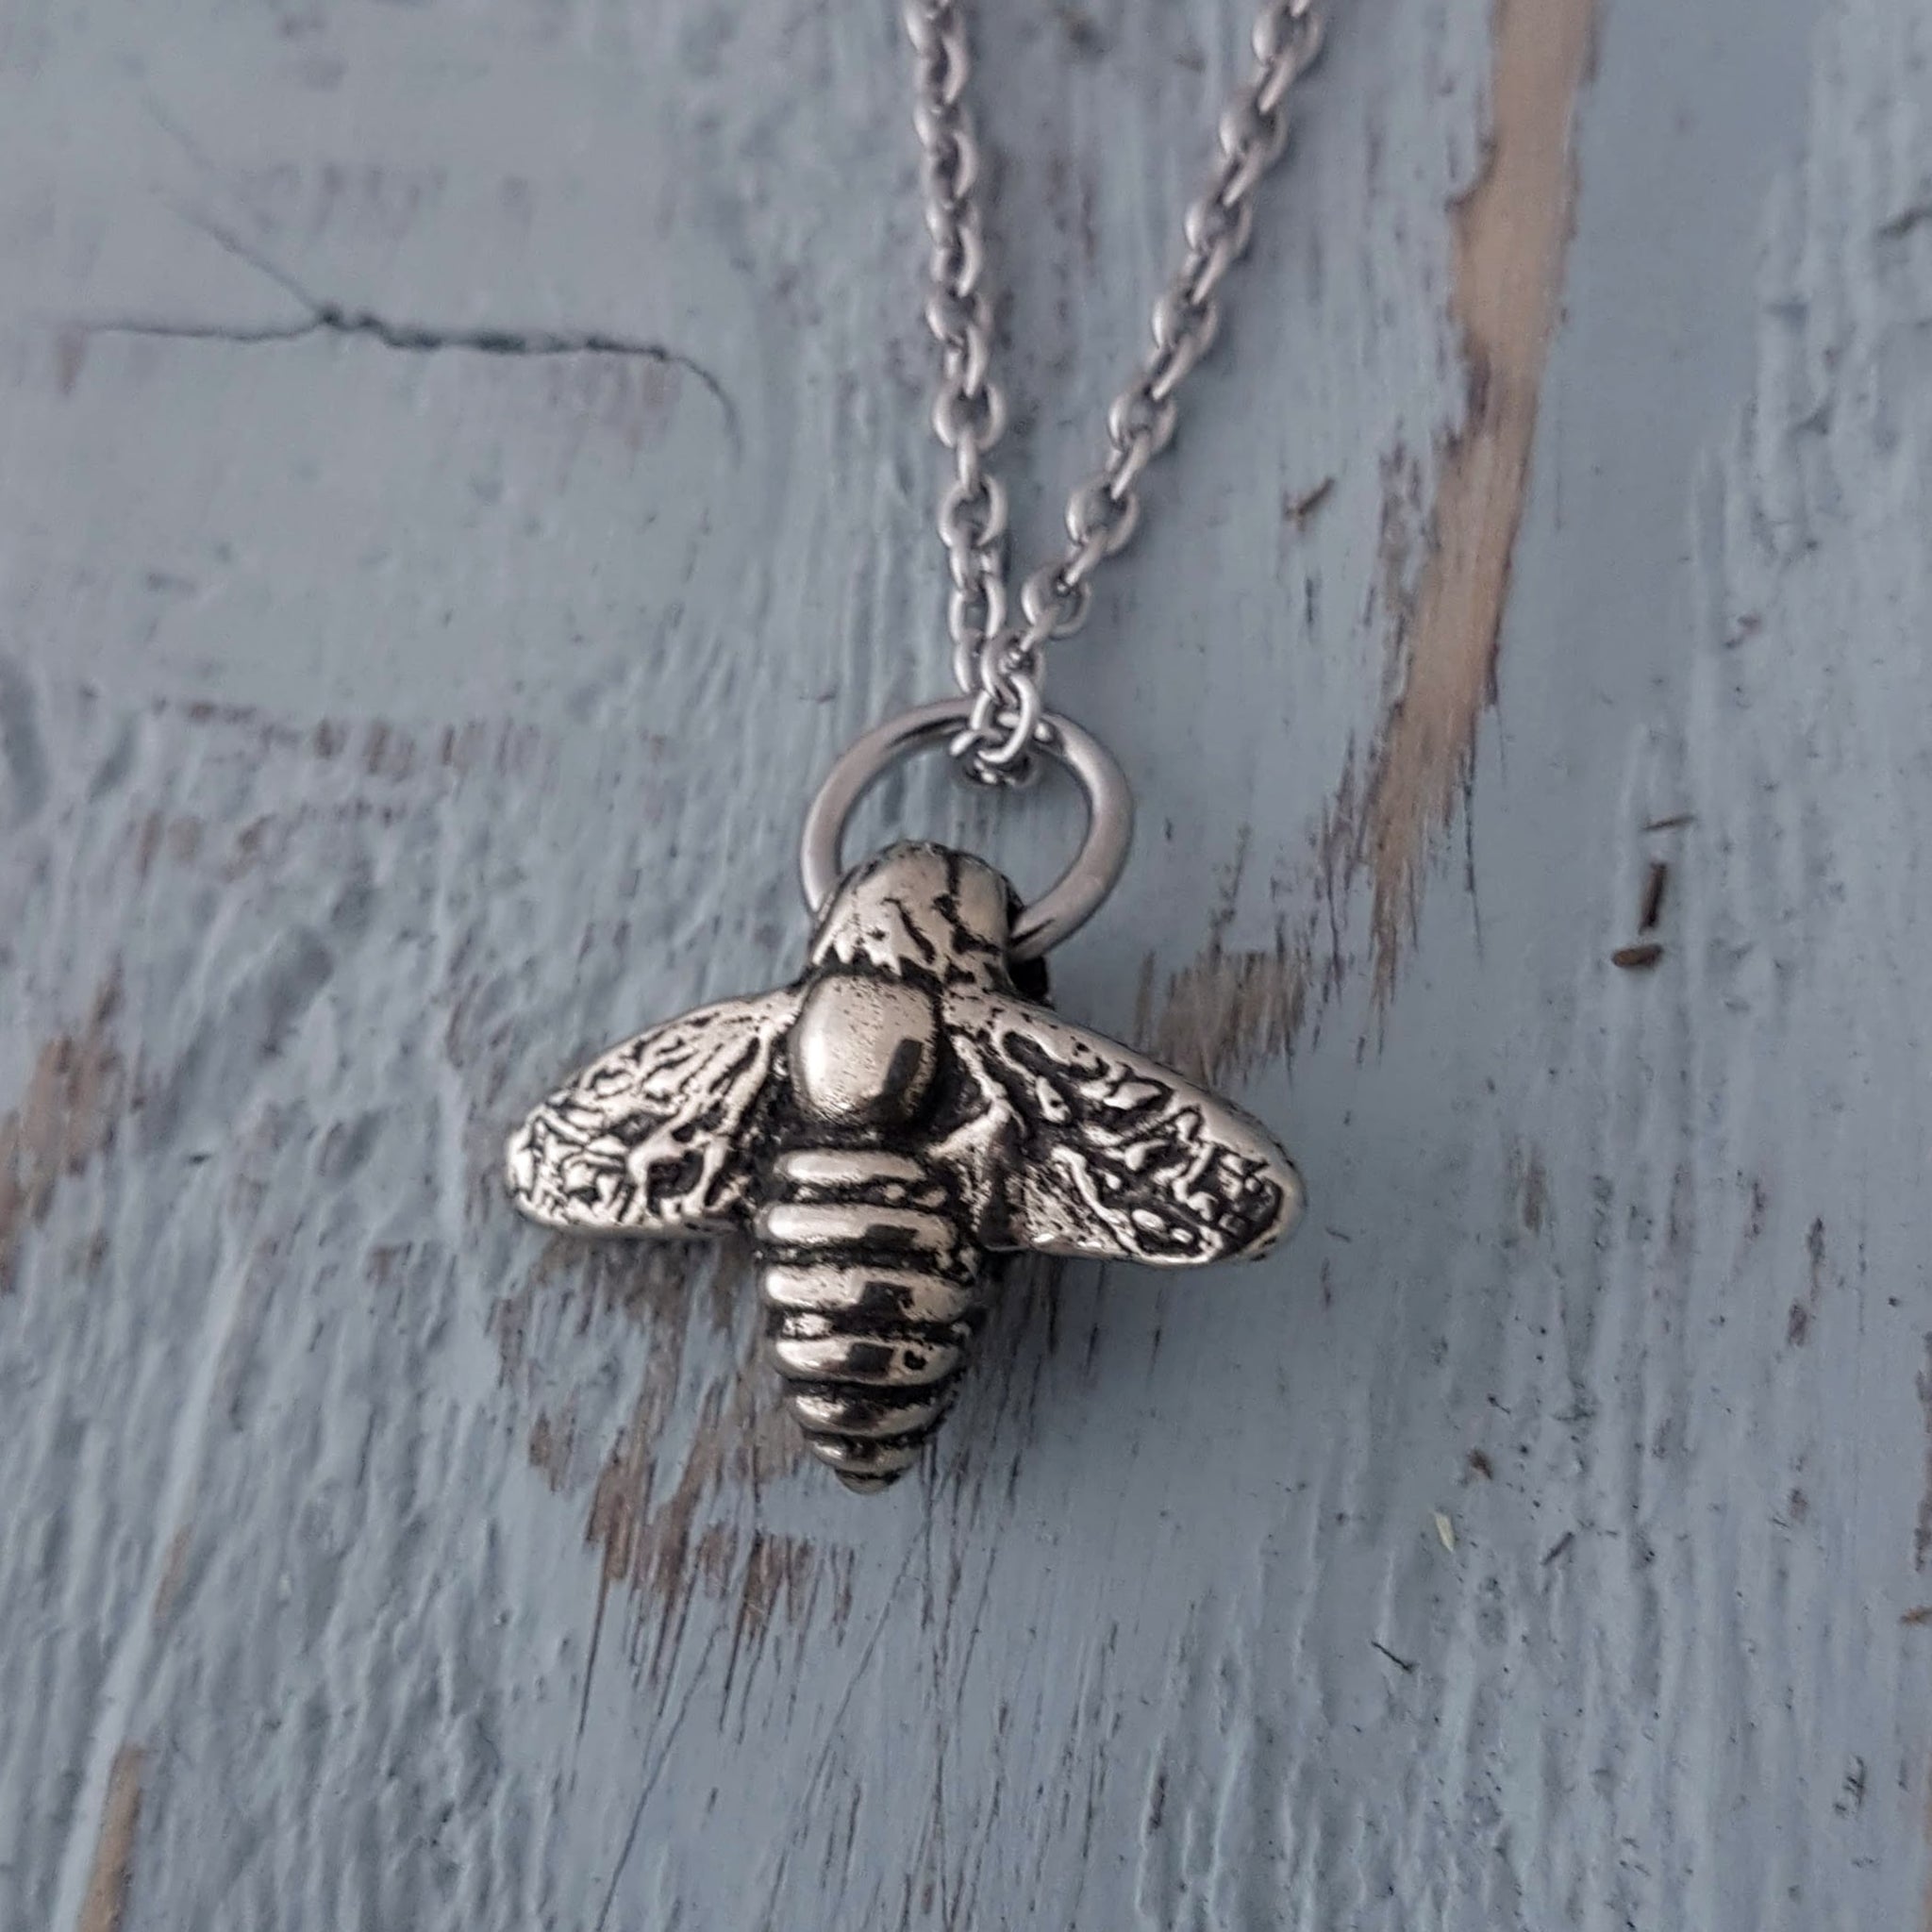 Flying Honey Bumble Bee Charm Necklace - Gwen Delicious Jewelry Designs